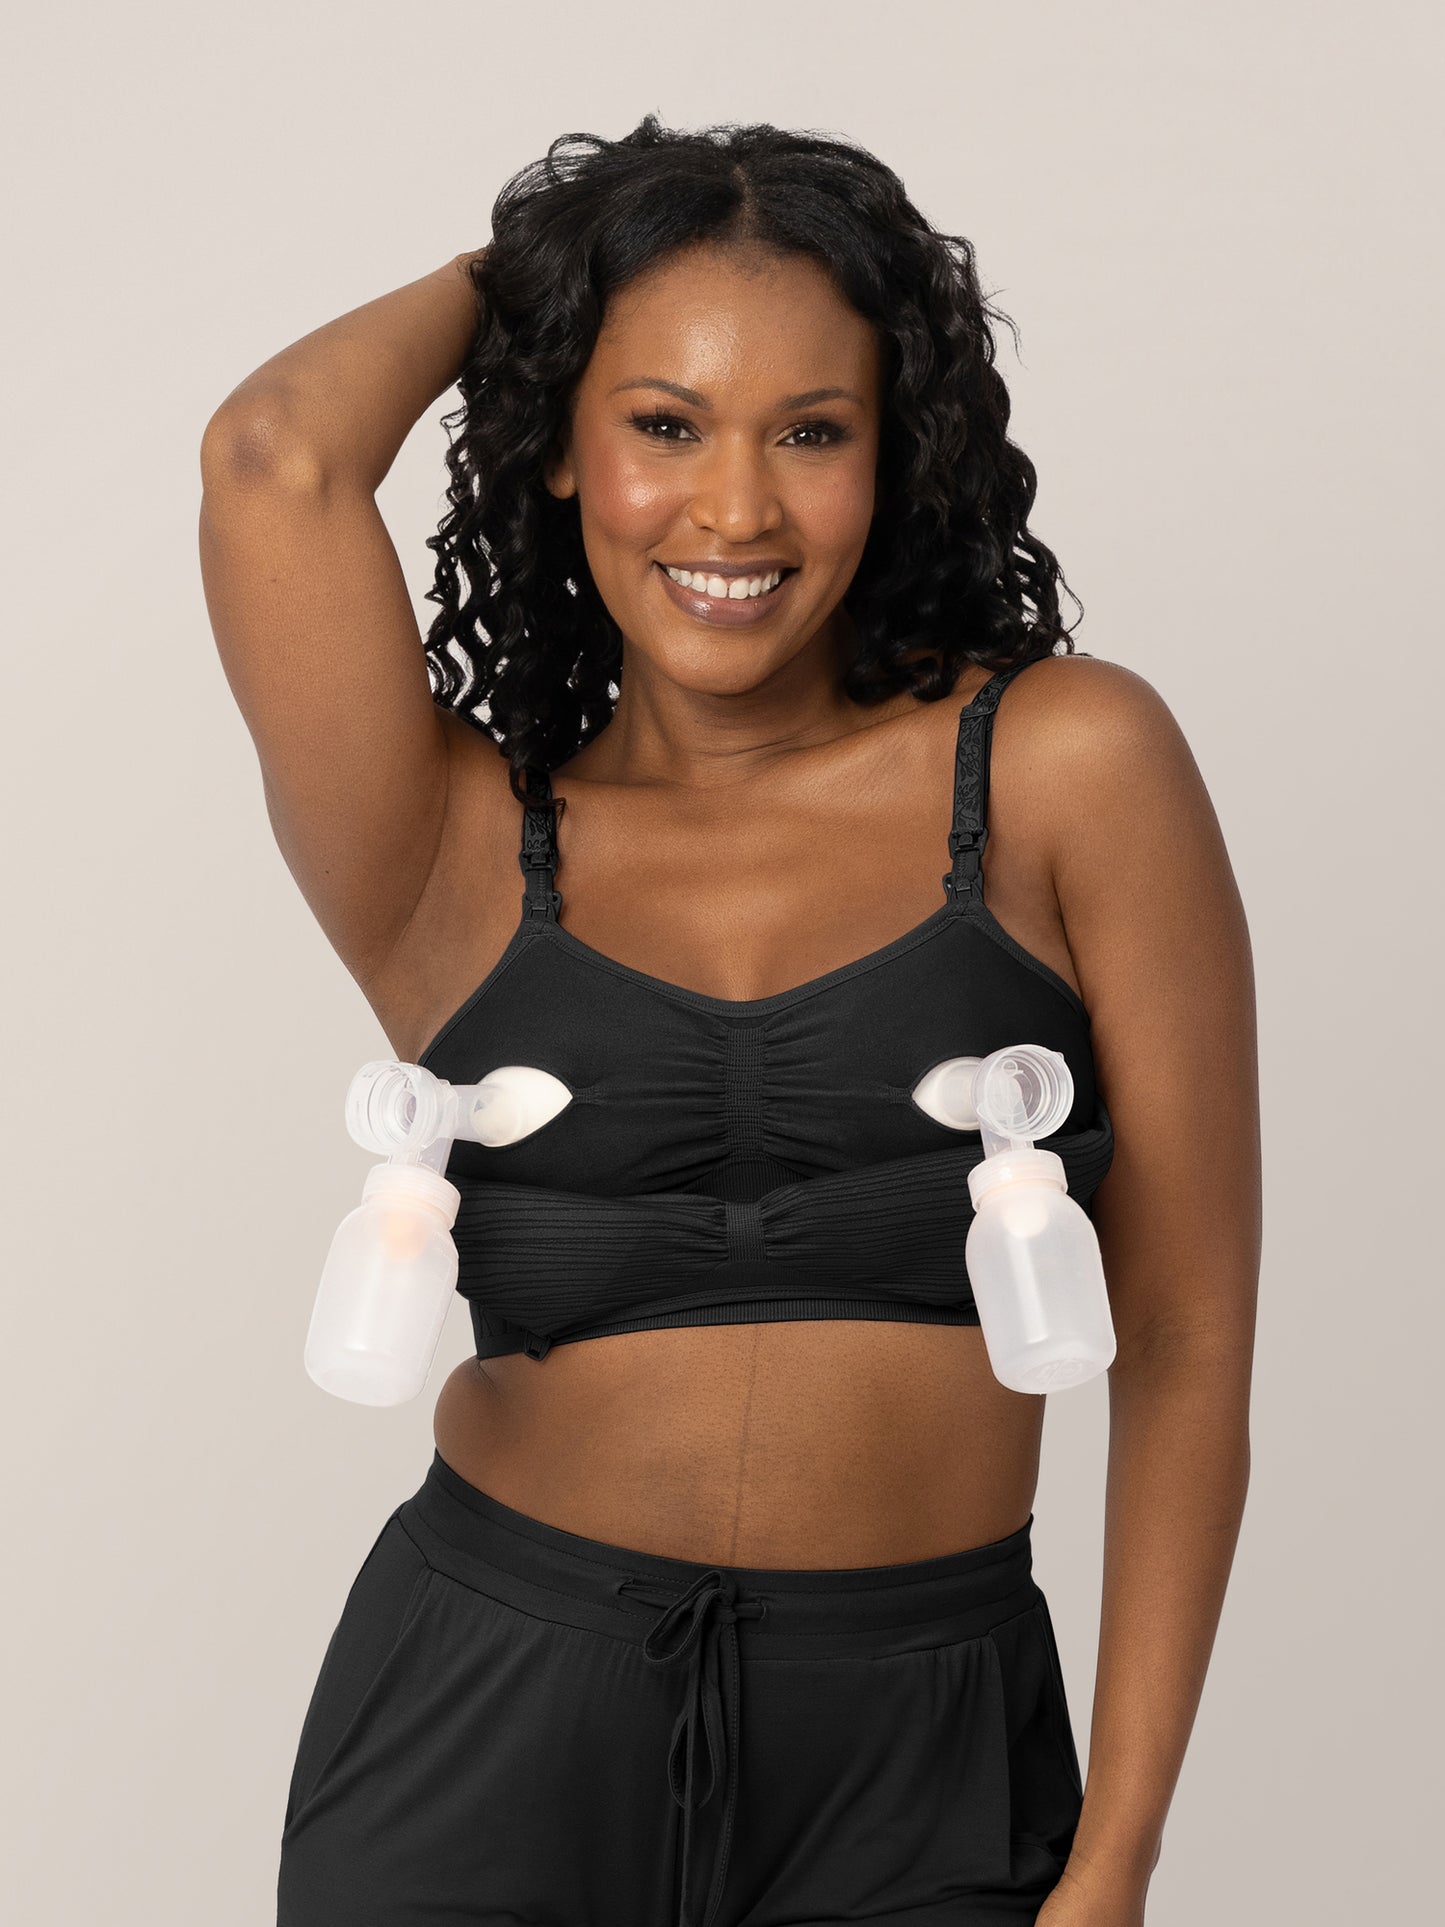 Kindred By Kindred Bravely Women's Sports Pumping & Nursing Bra - Twilight  Xl : Target